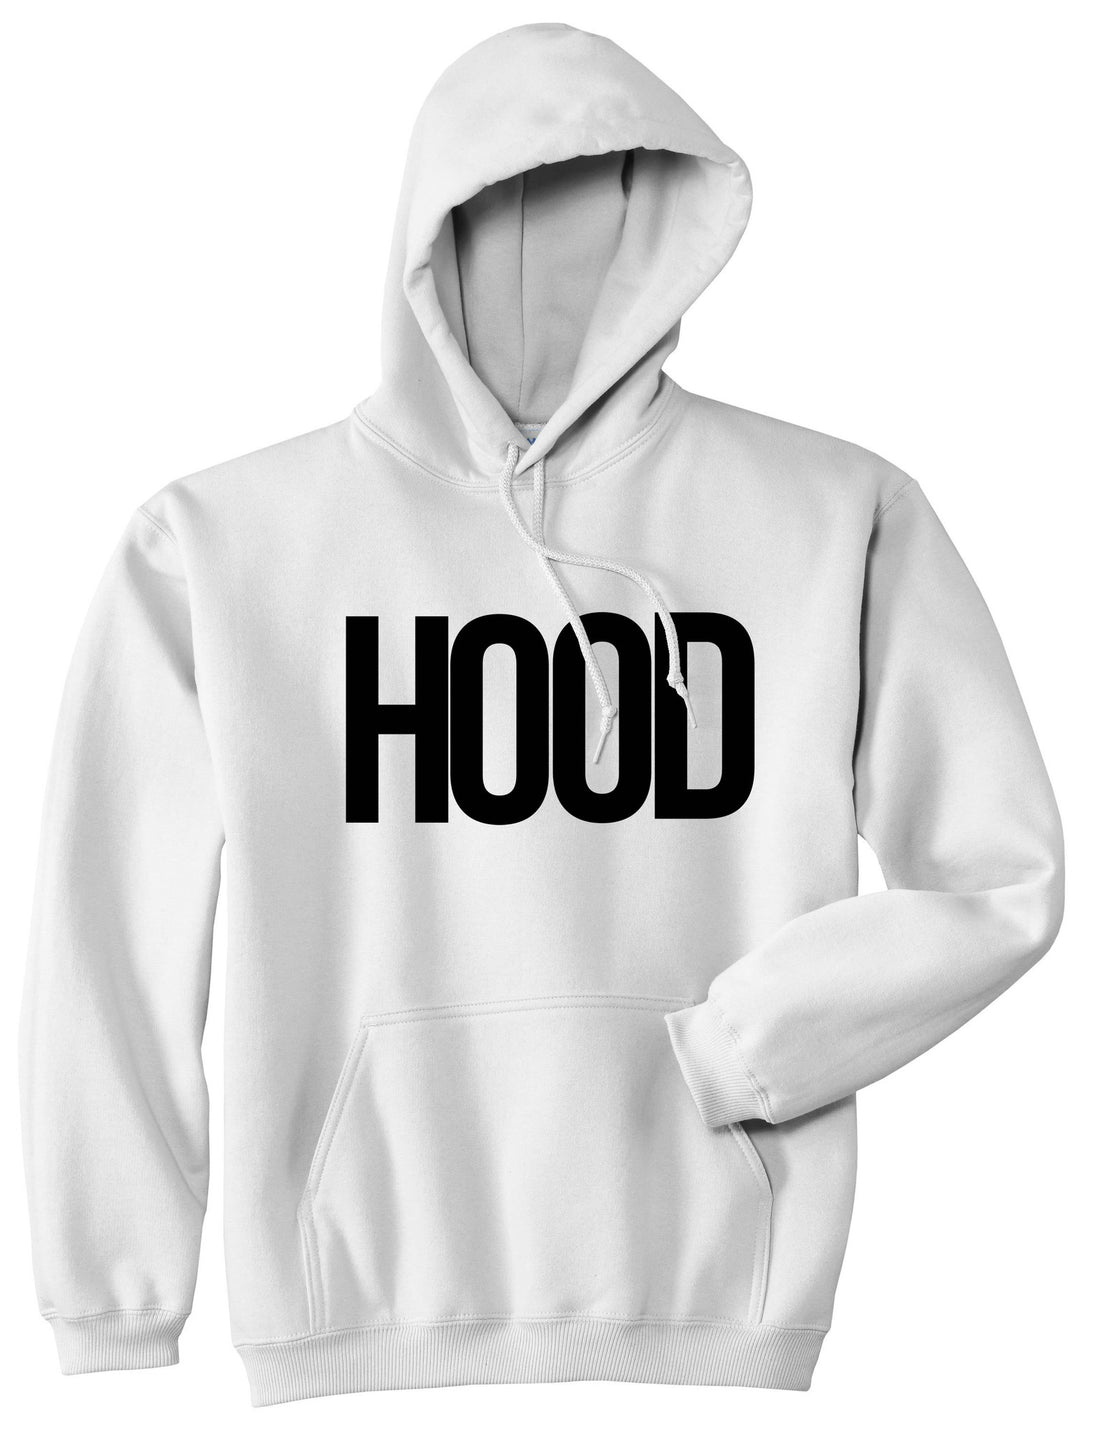 Hood Trap Style Compton New York Air Boys Kids Pullover Hoodie Hoody in White by Kings Of NY